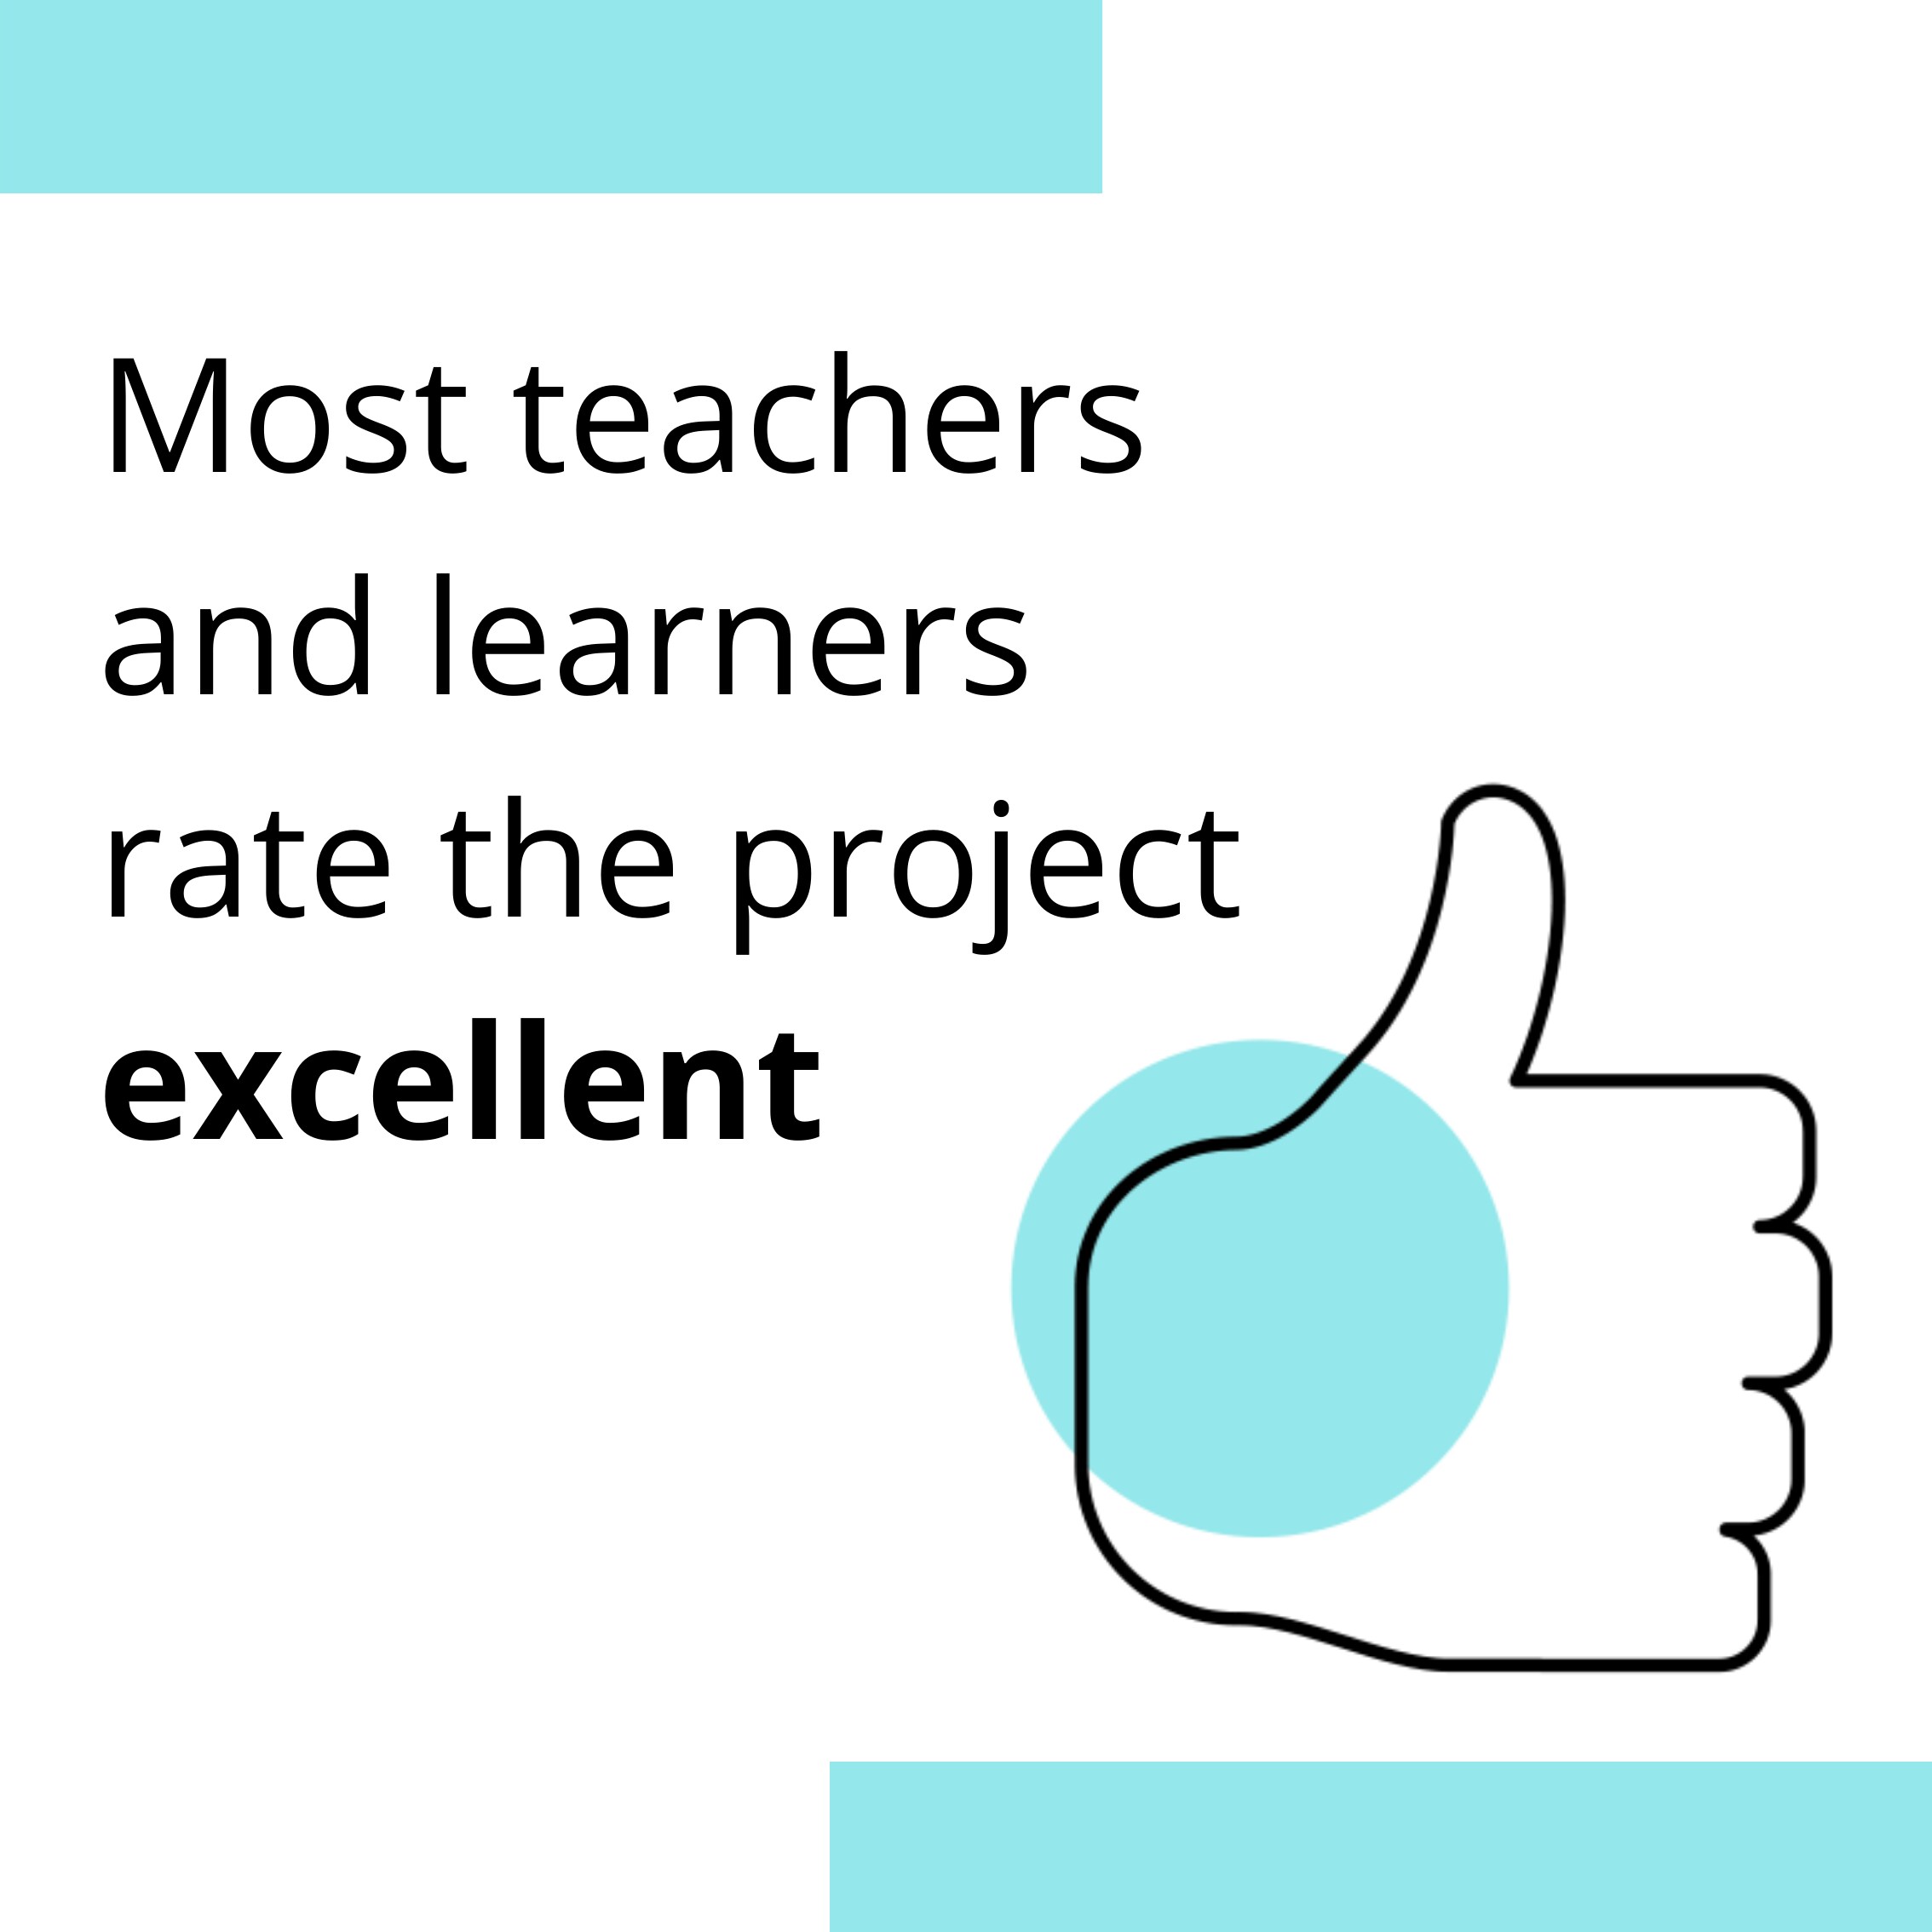 Stat - most teachers and learners rate the project excellent